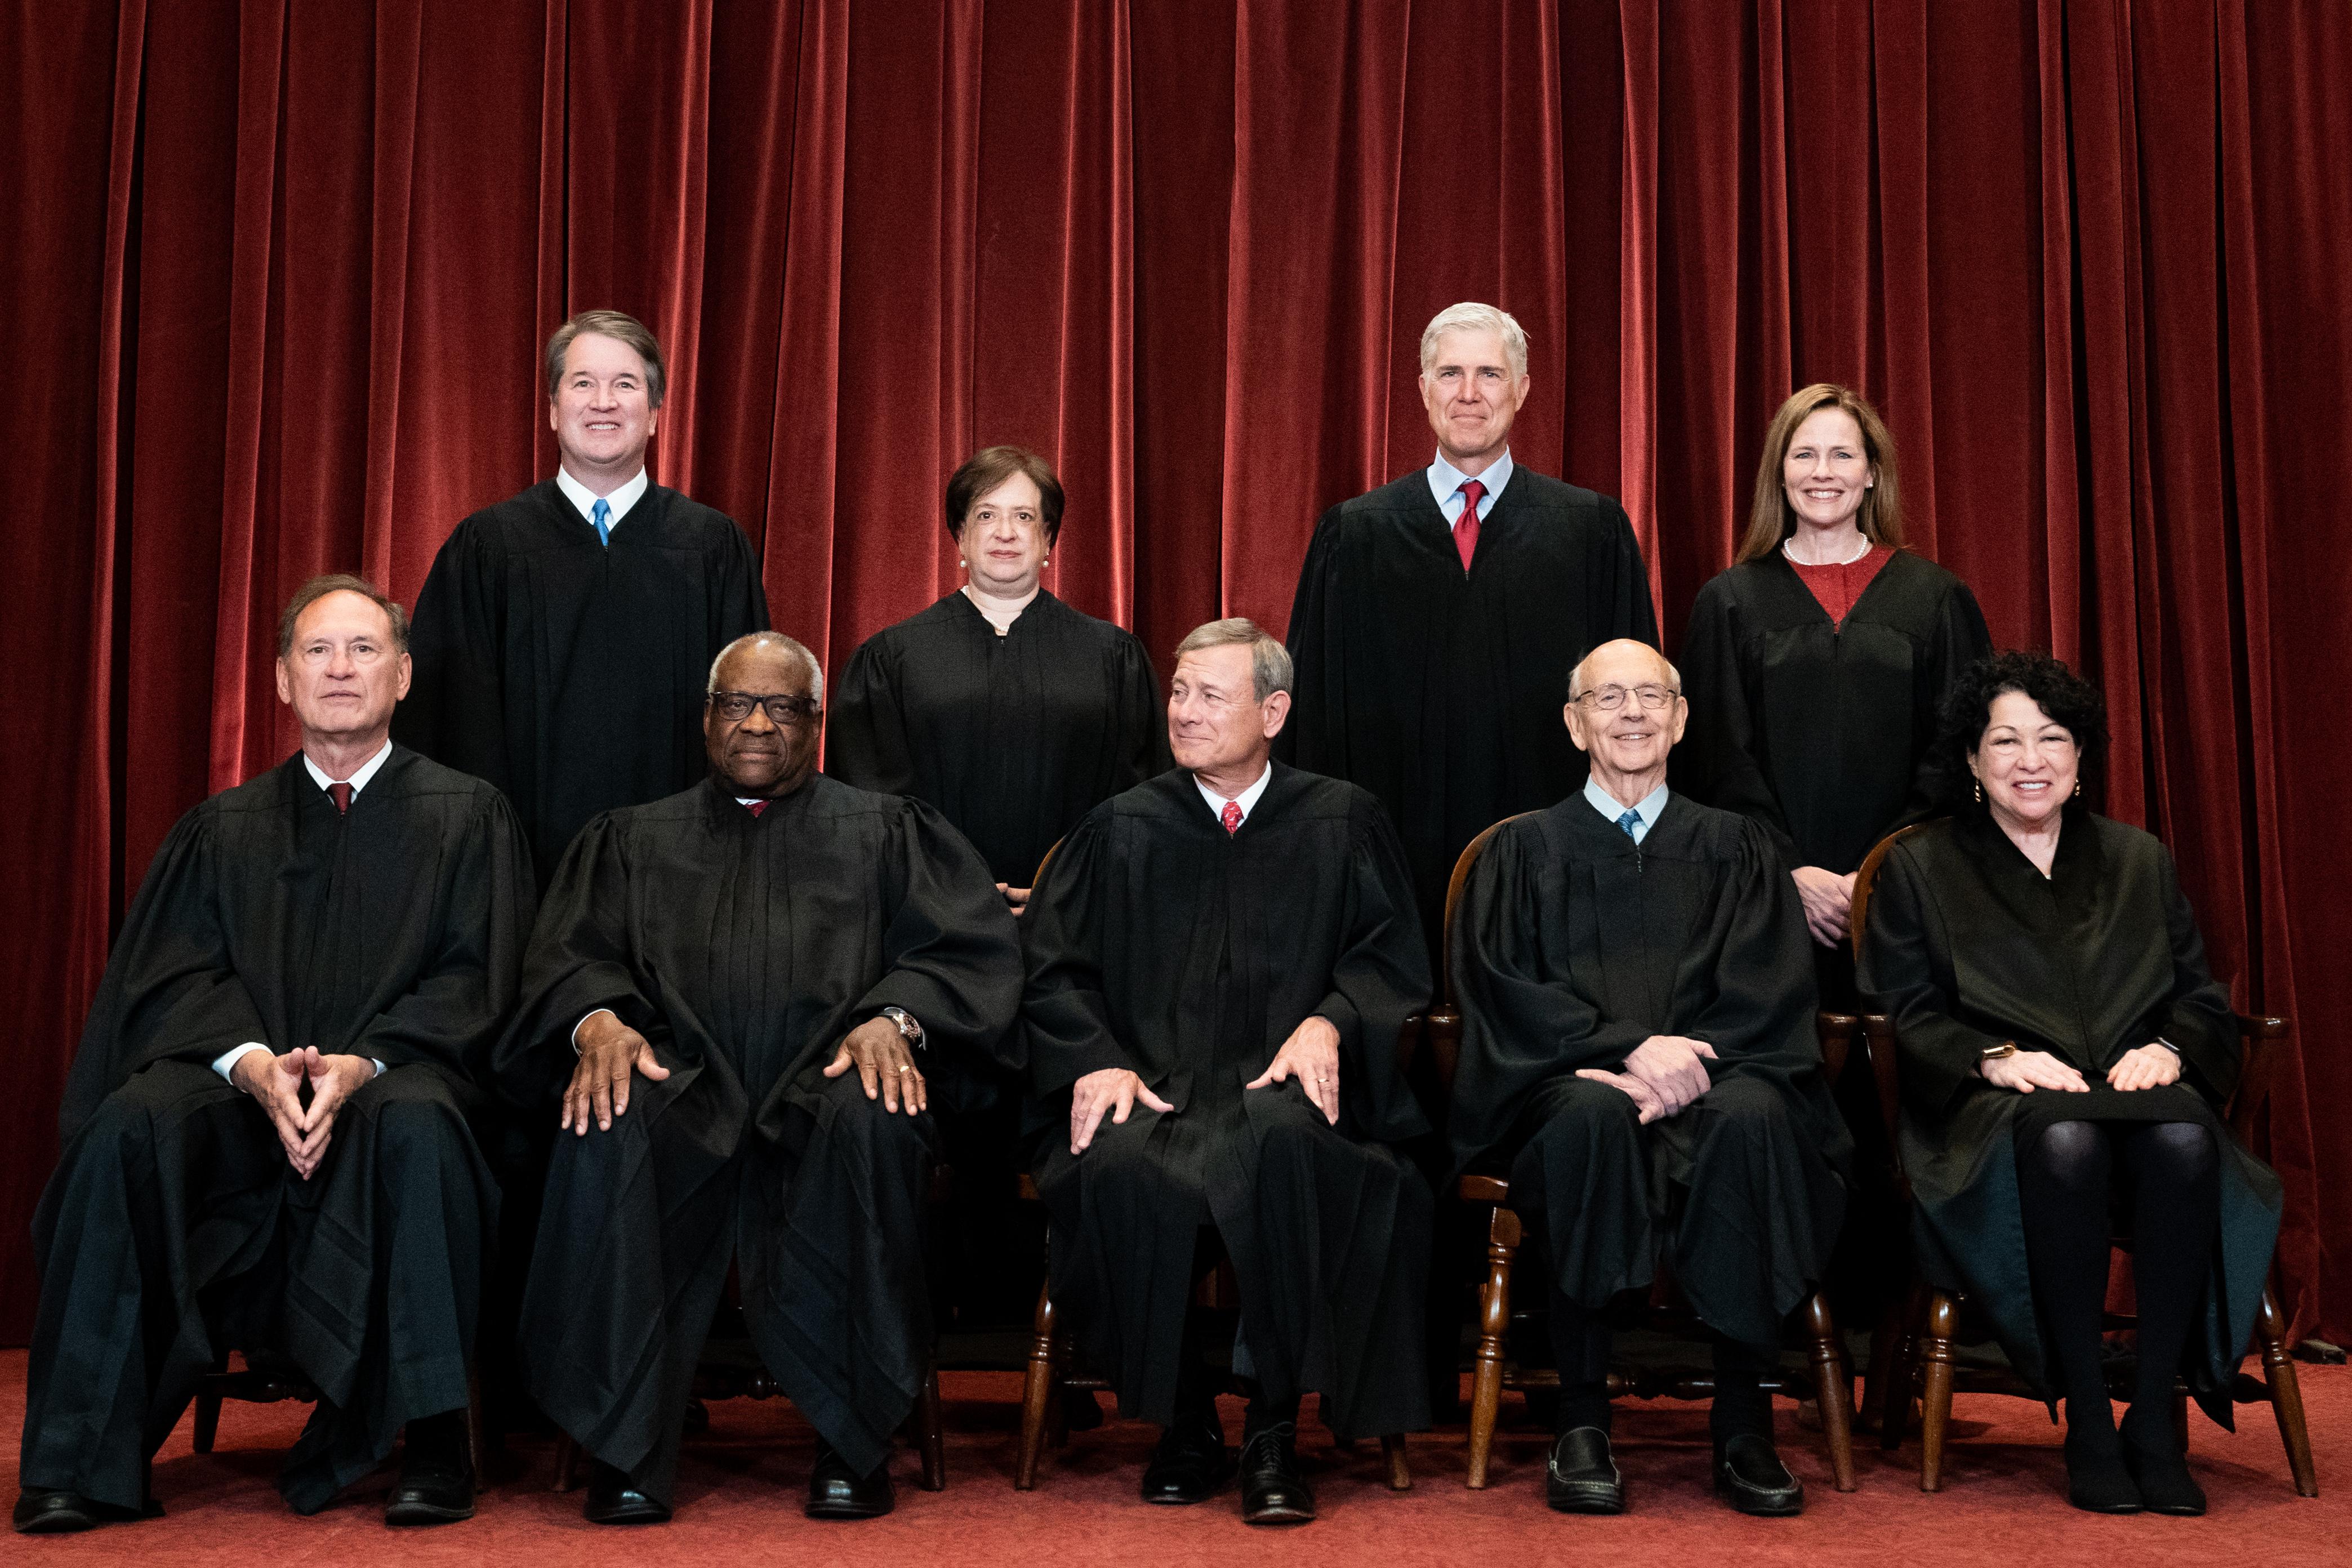 All nine justices of the Supreme Court wearing their robes and smiling in front of a red velvet curtain